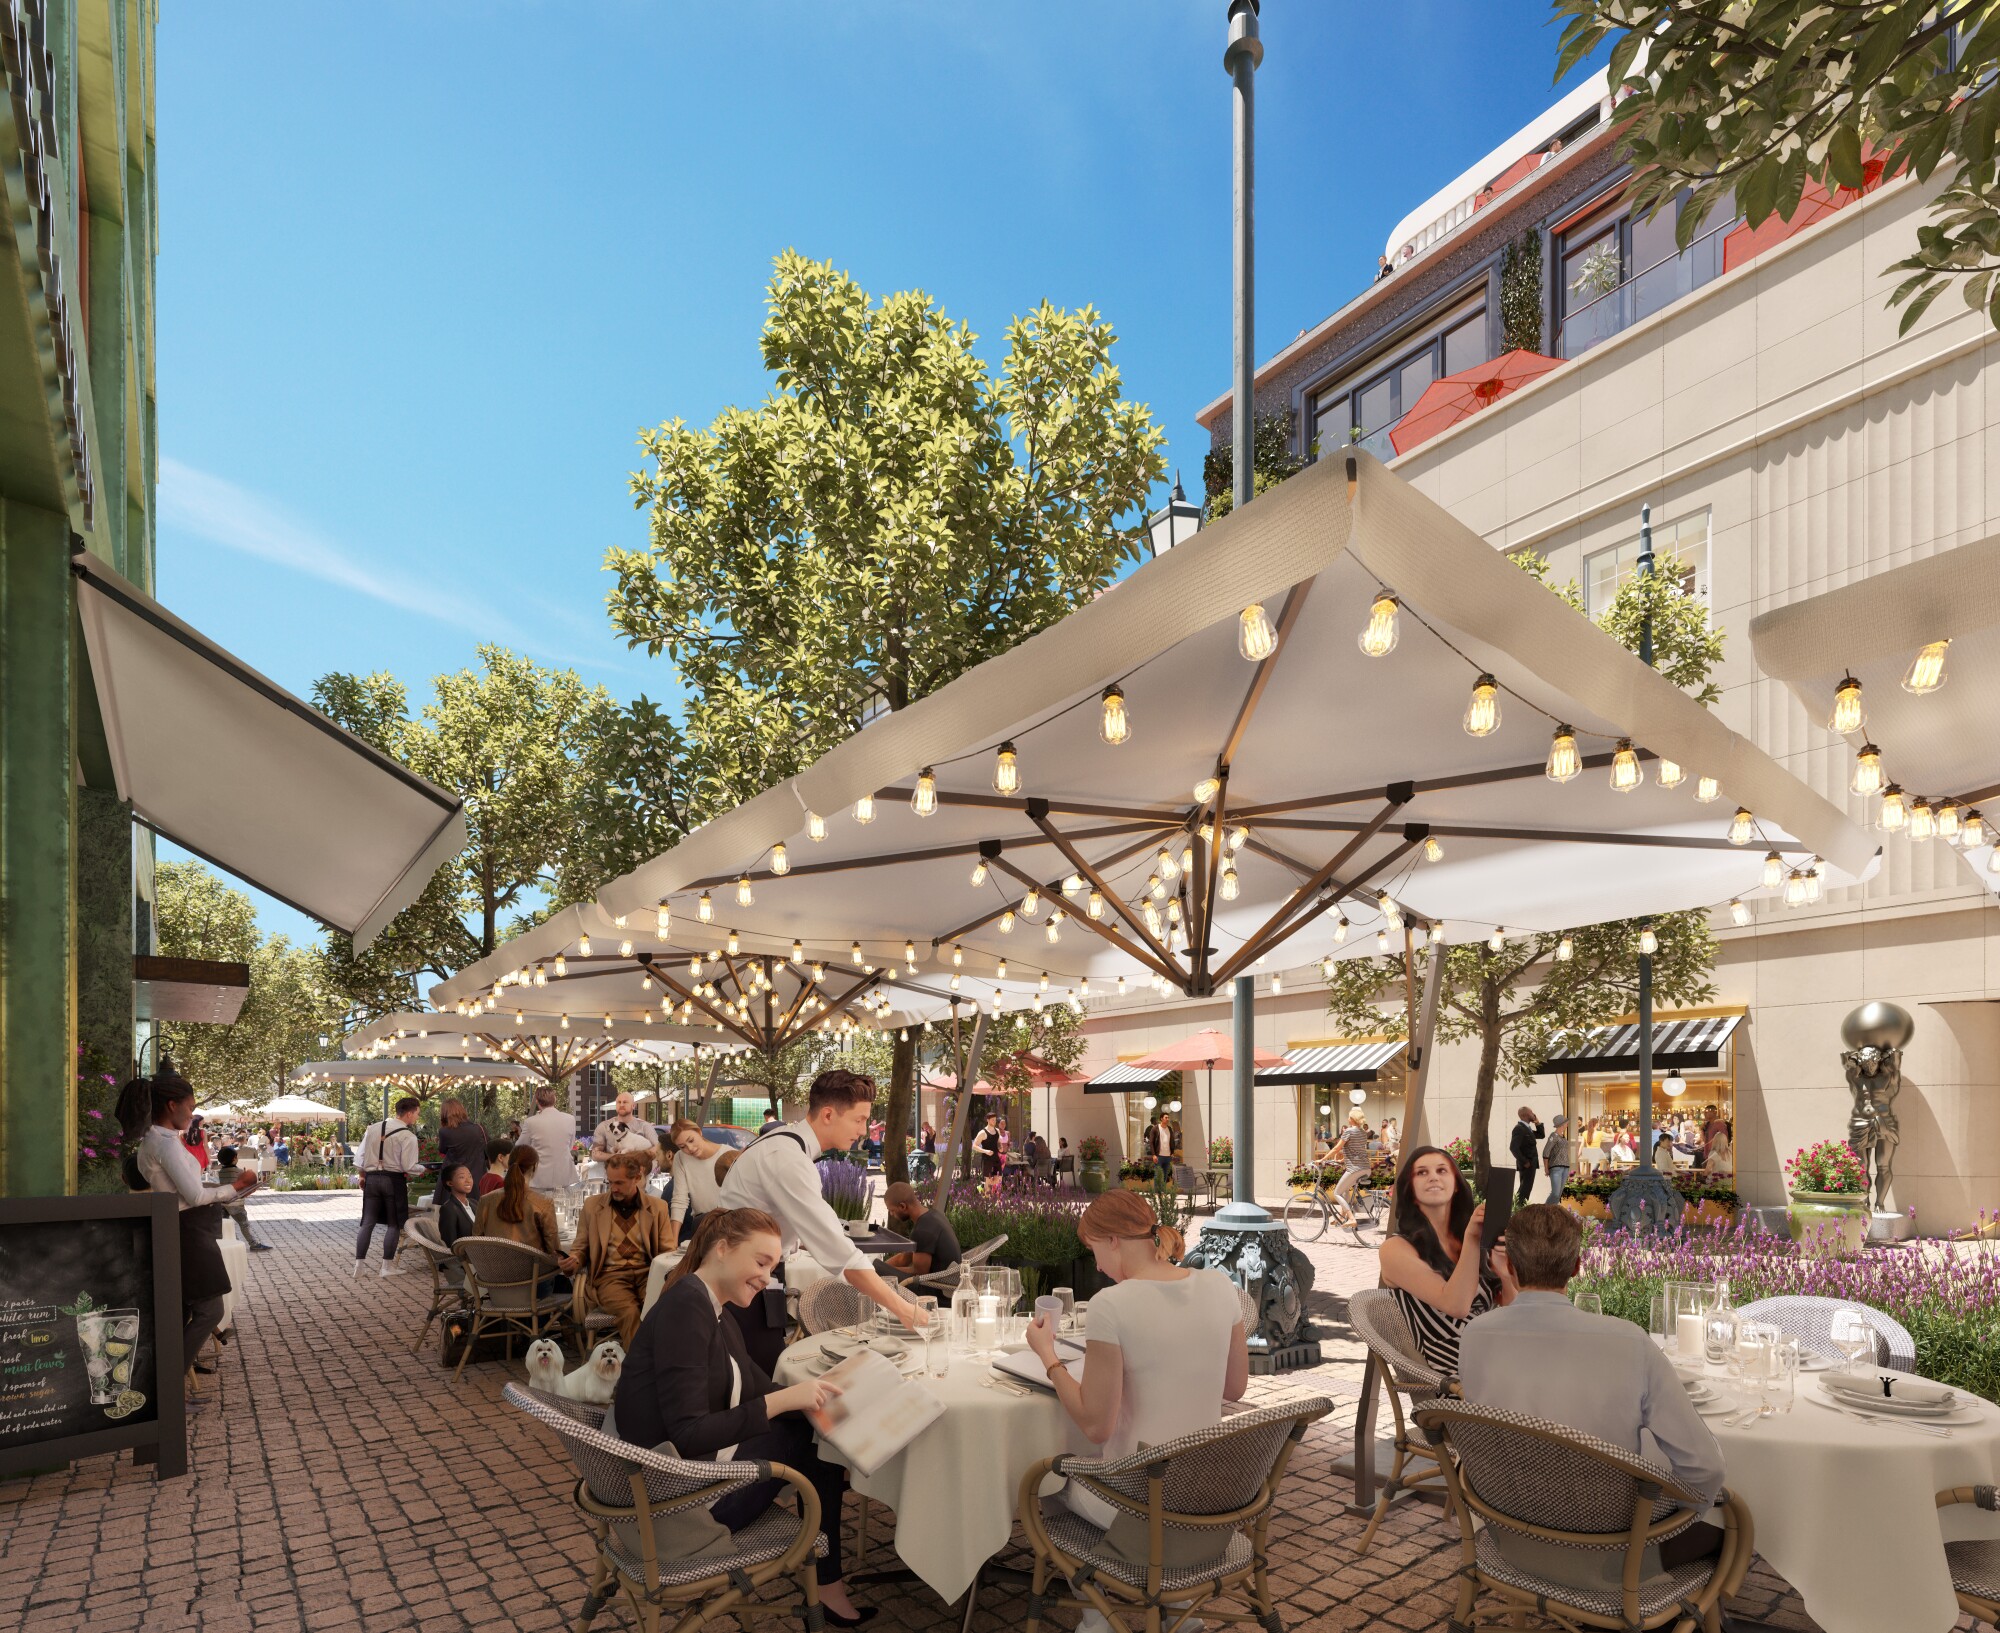 A rendering shows outdoor dining at the proposed Saks Fifth Avenue development.